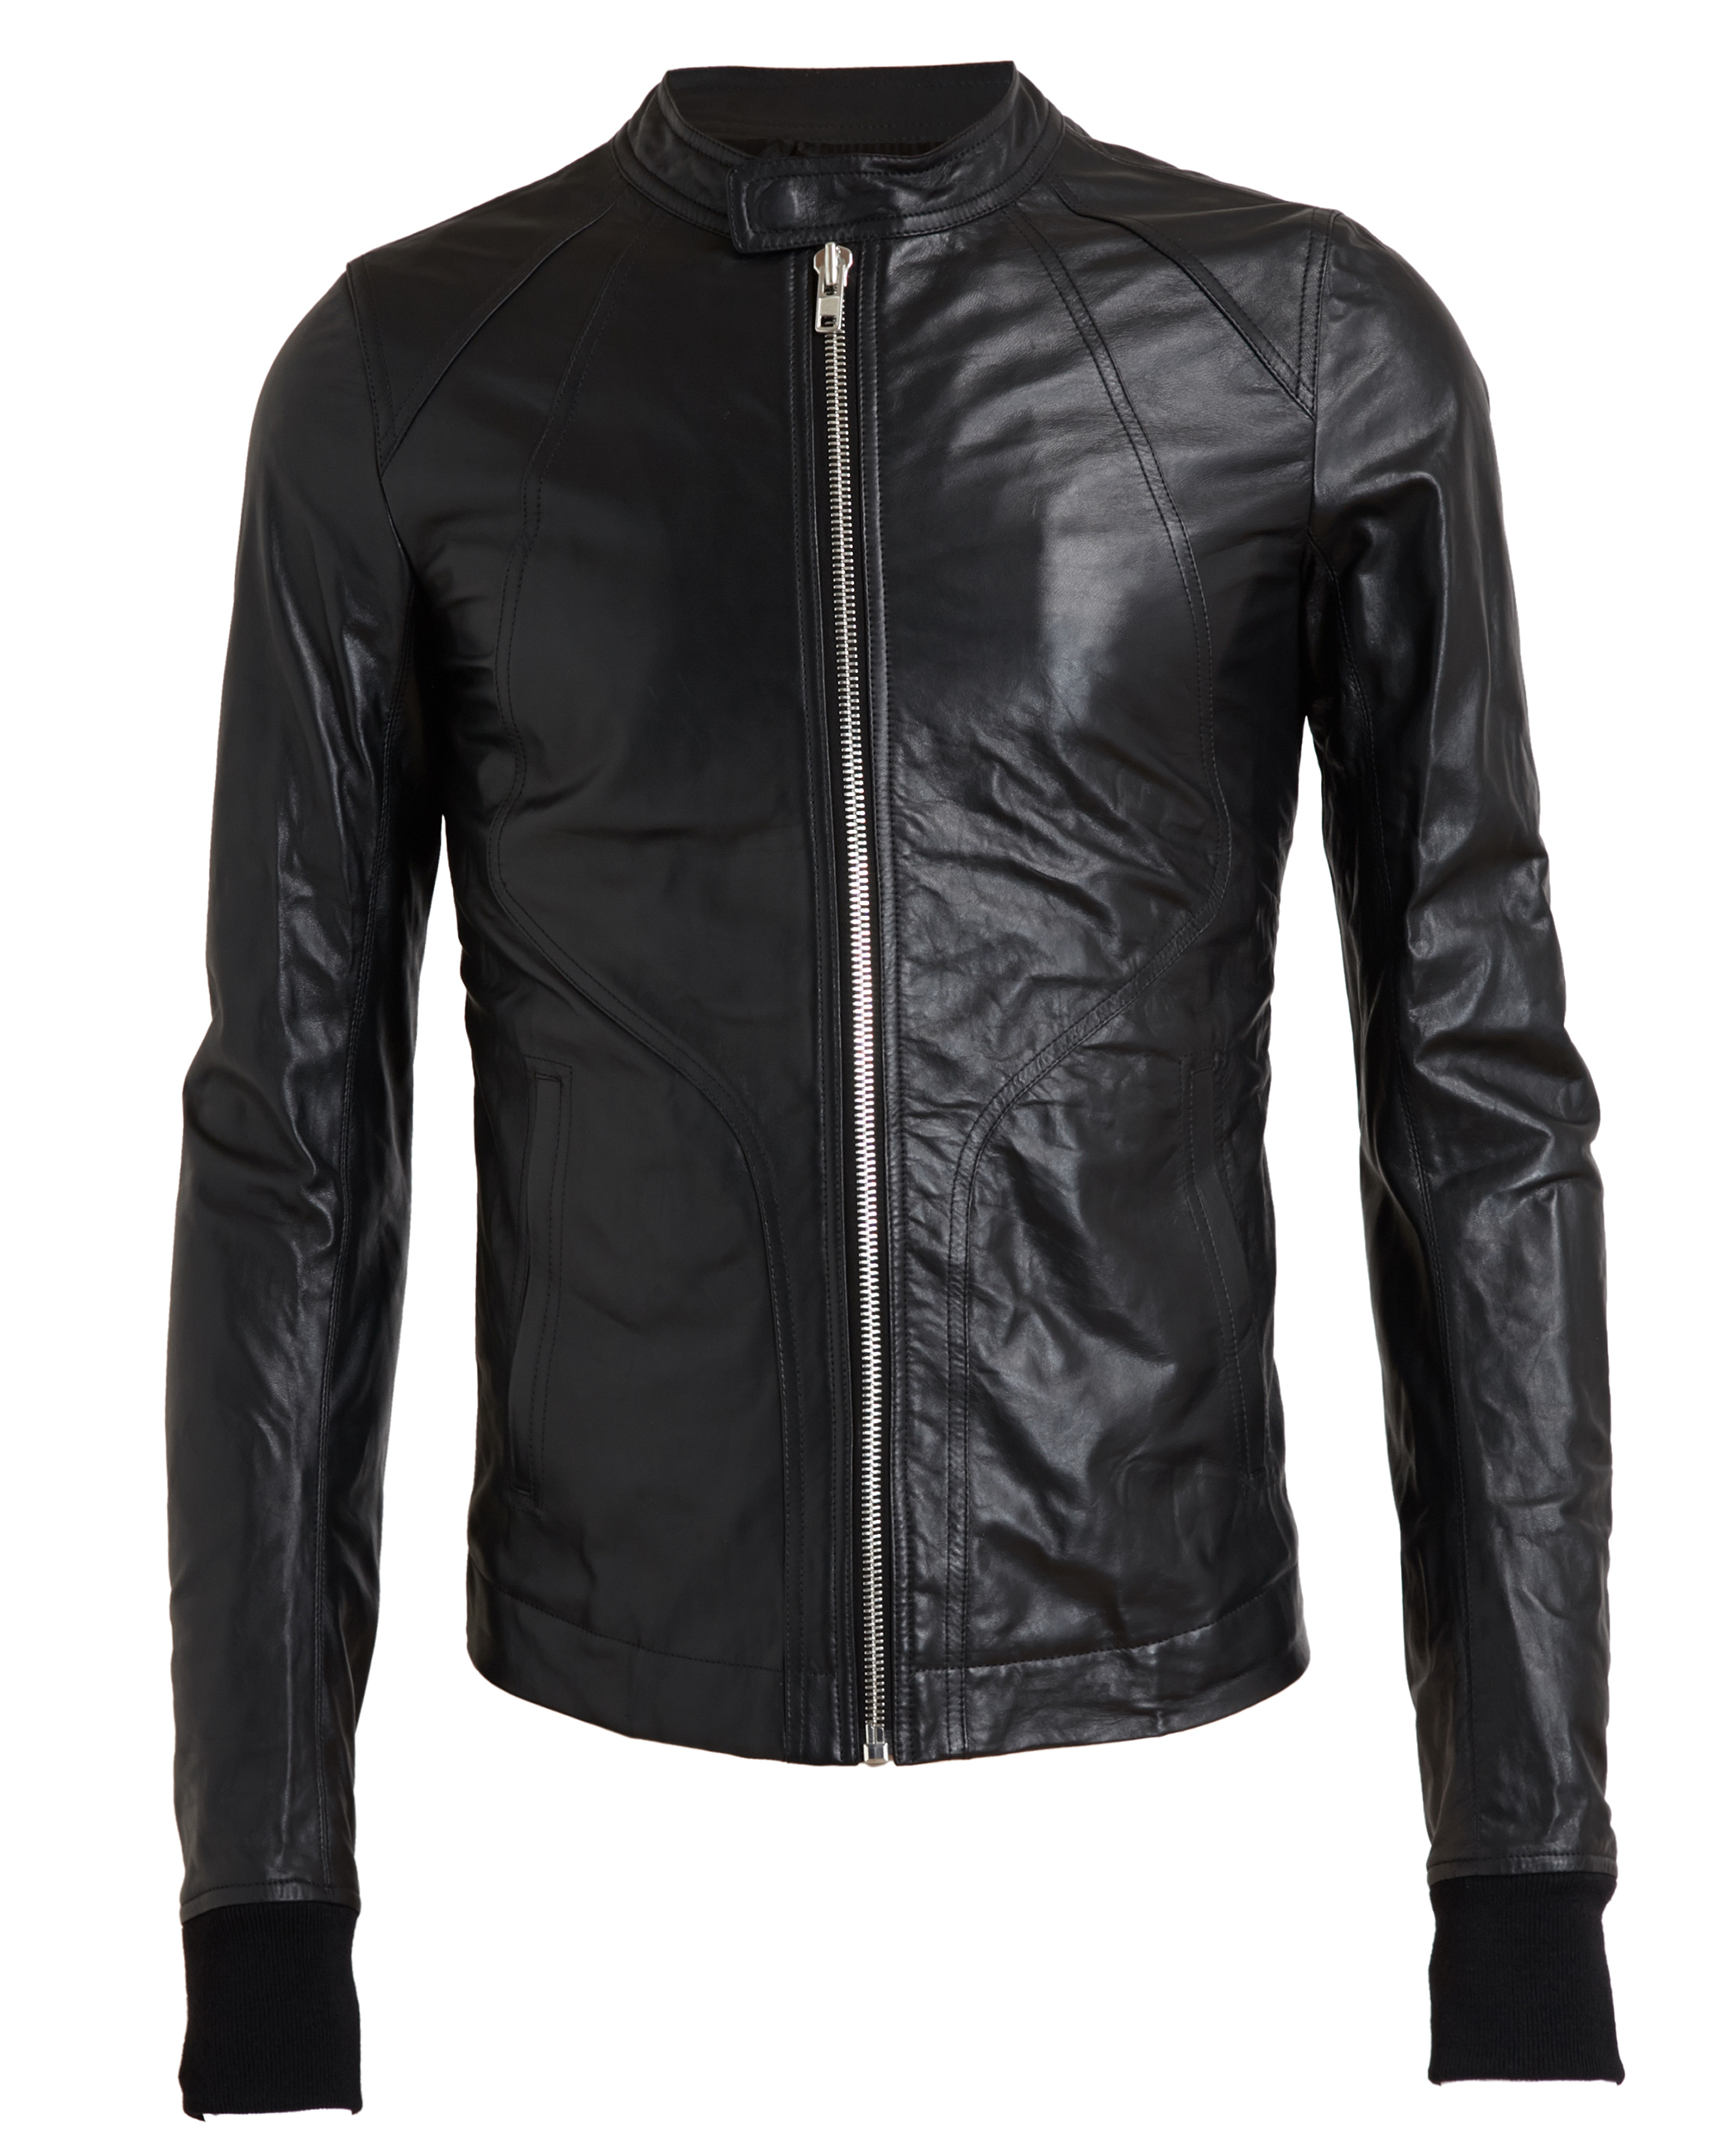 Rick Owens Intarsia Lamb Leather Jacket in Black for Men - Lyst